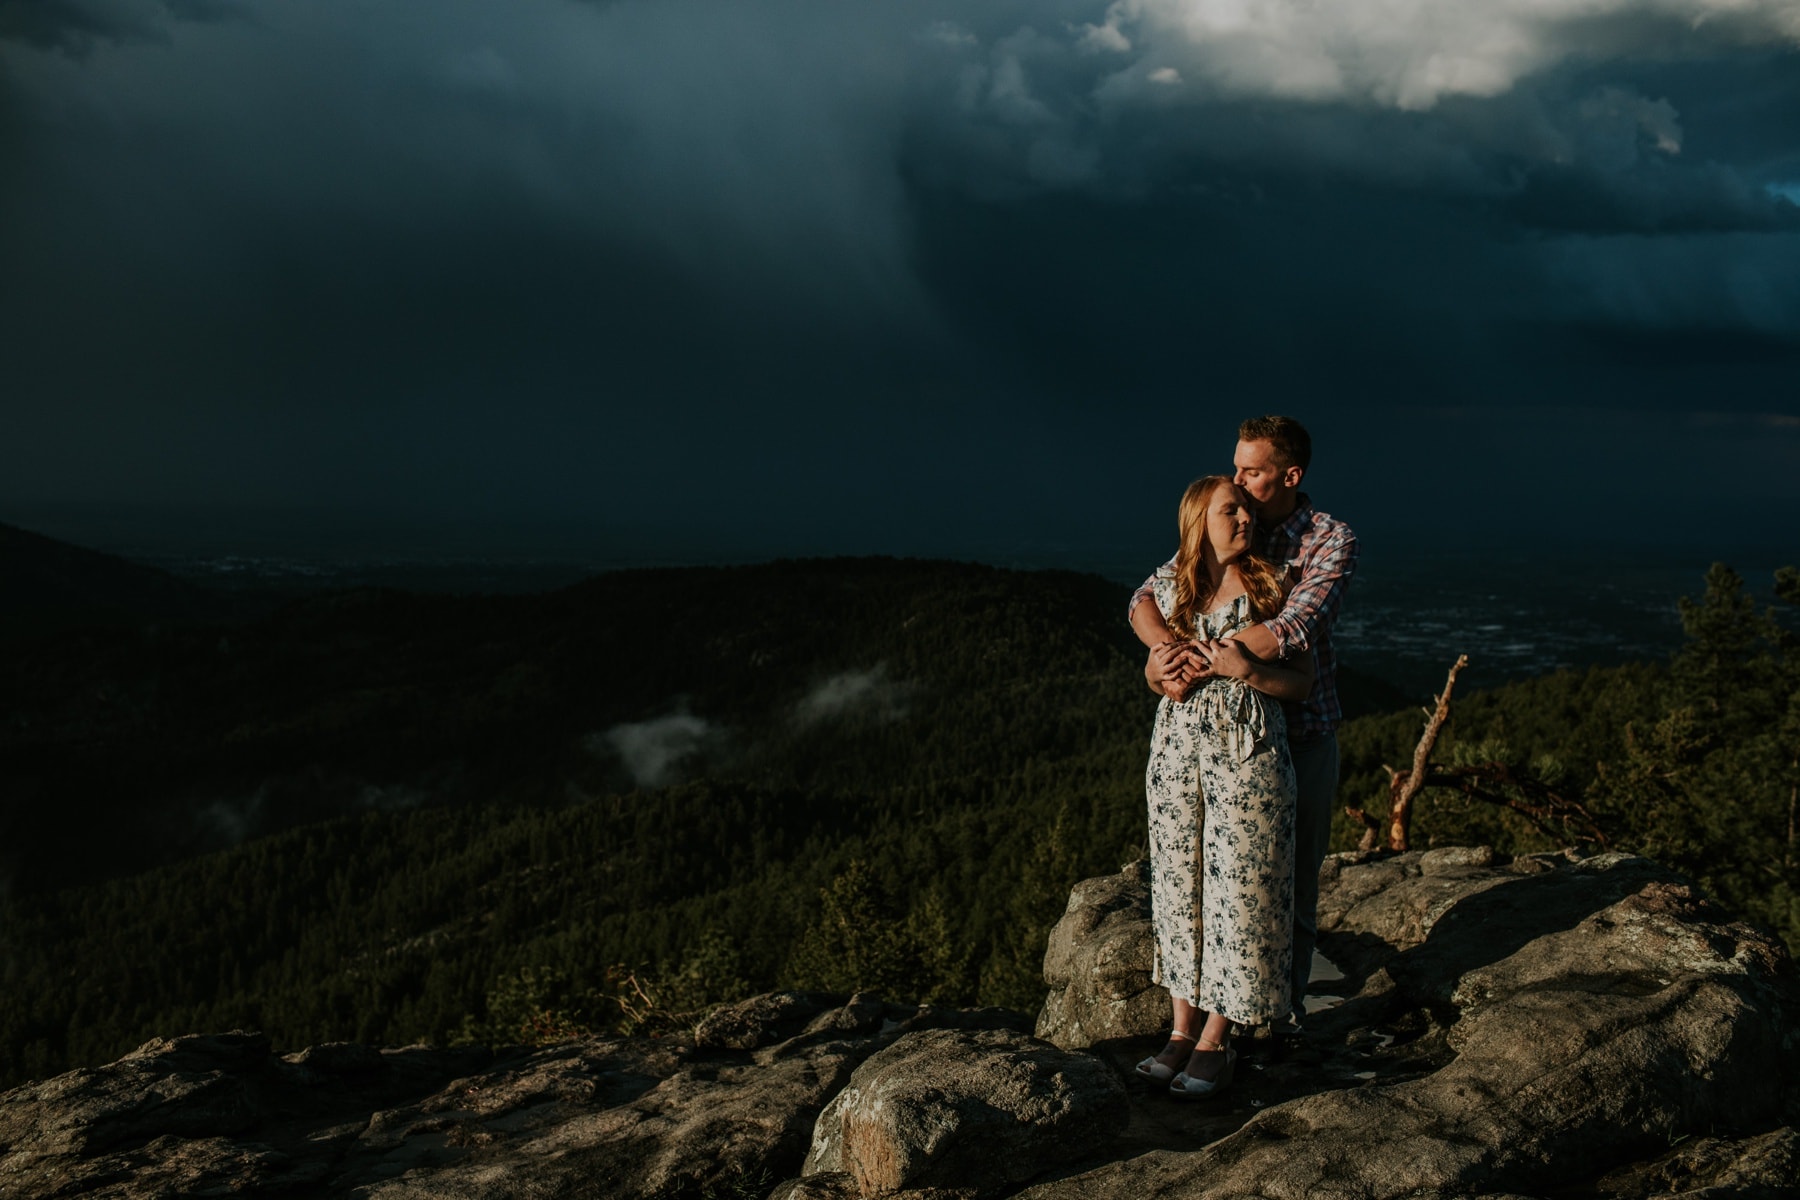 lost gulch overlook engagement, lost gulch overlook, engagement session after the storm, stormy engagement session, boulder engagment session, hail storm, boulder engagement session